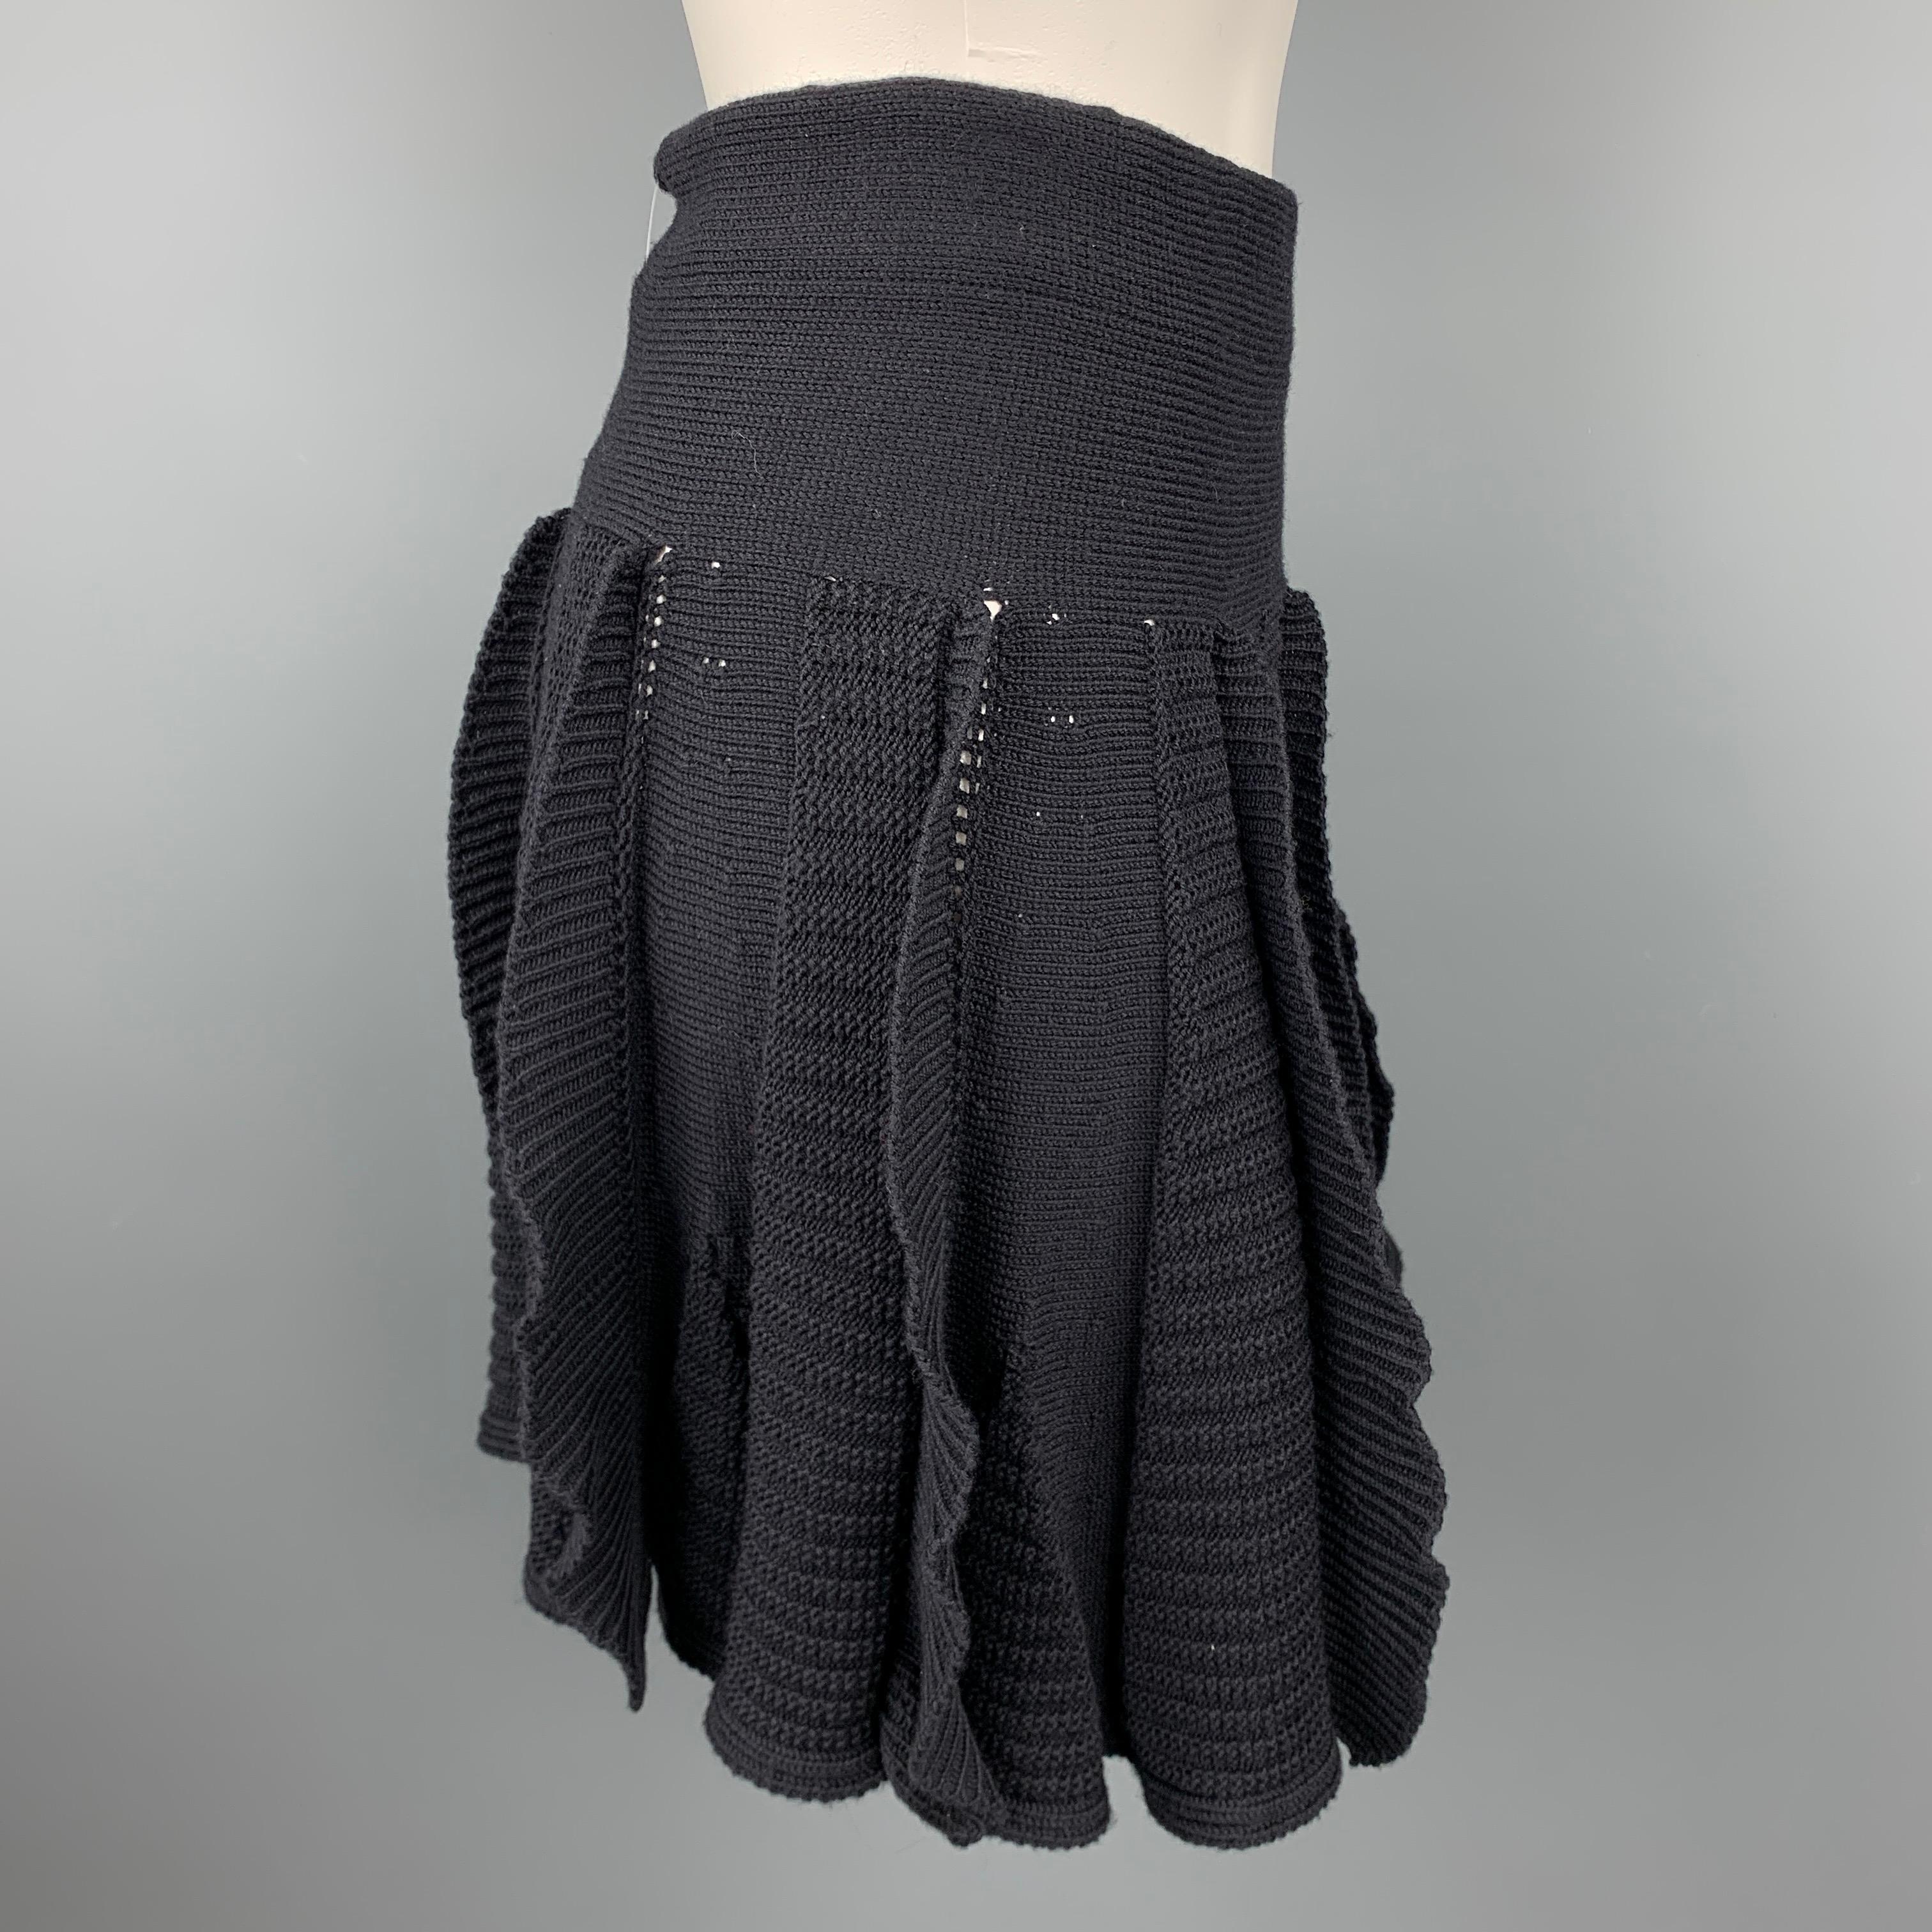 VALENTINO skirt comes in a black knitted textured virgin wool featuring a high waisted circle style. Made in Italy.

Very Good Pre-Owned Condition.
Marked: S

Measurements:

Waist: 24 in. 
Hip: 34 in. 
Length: 18.5 in. 